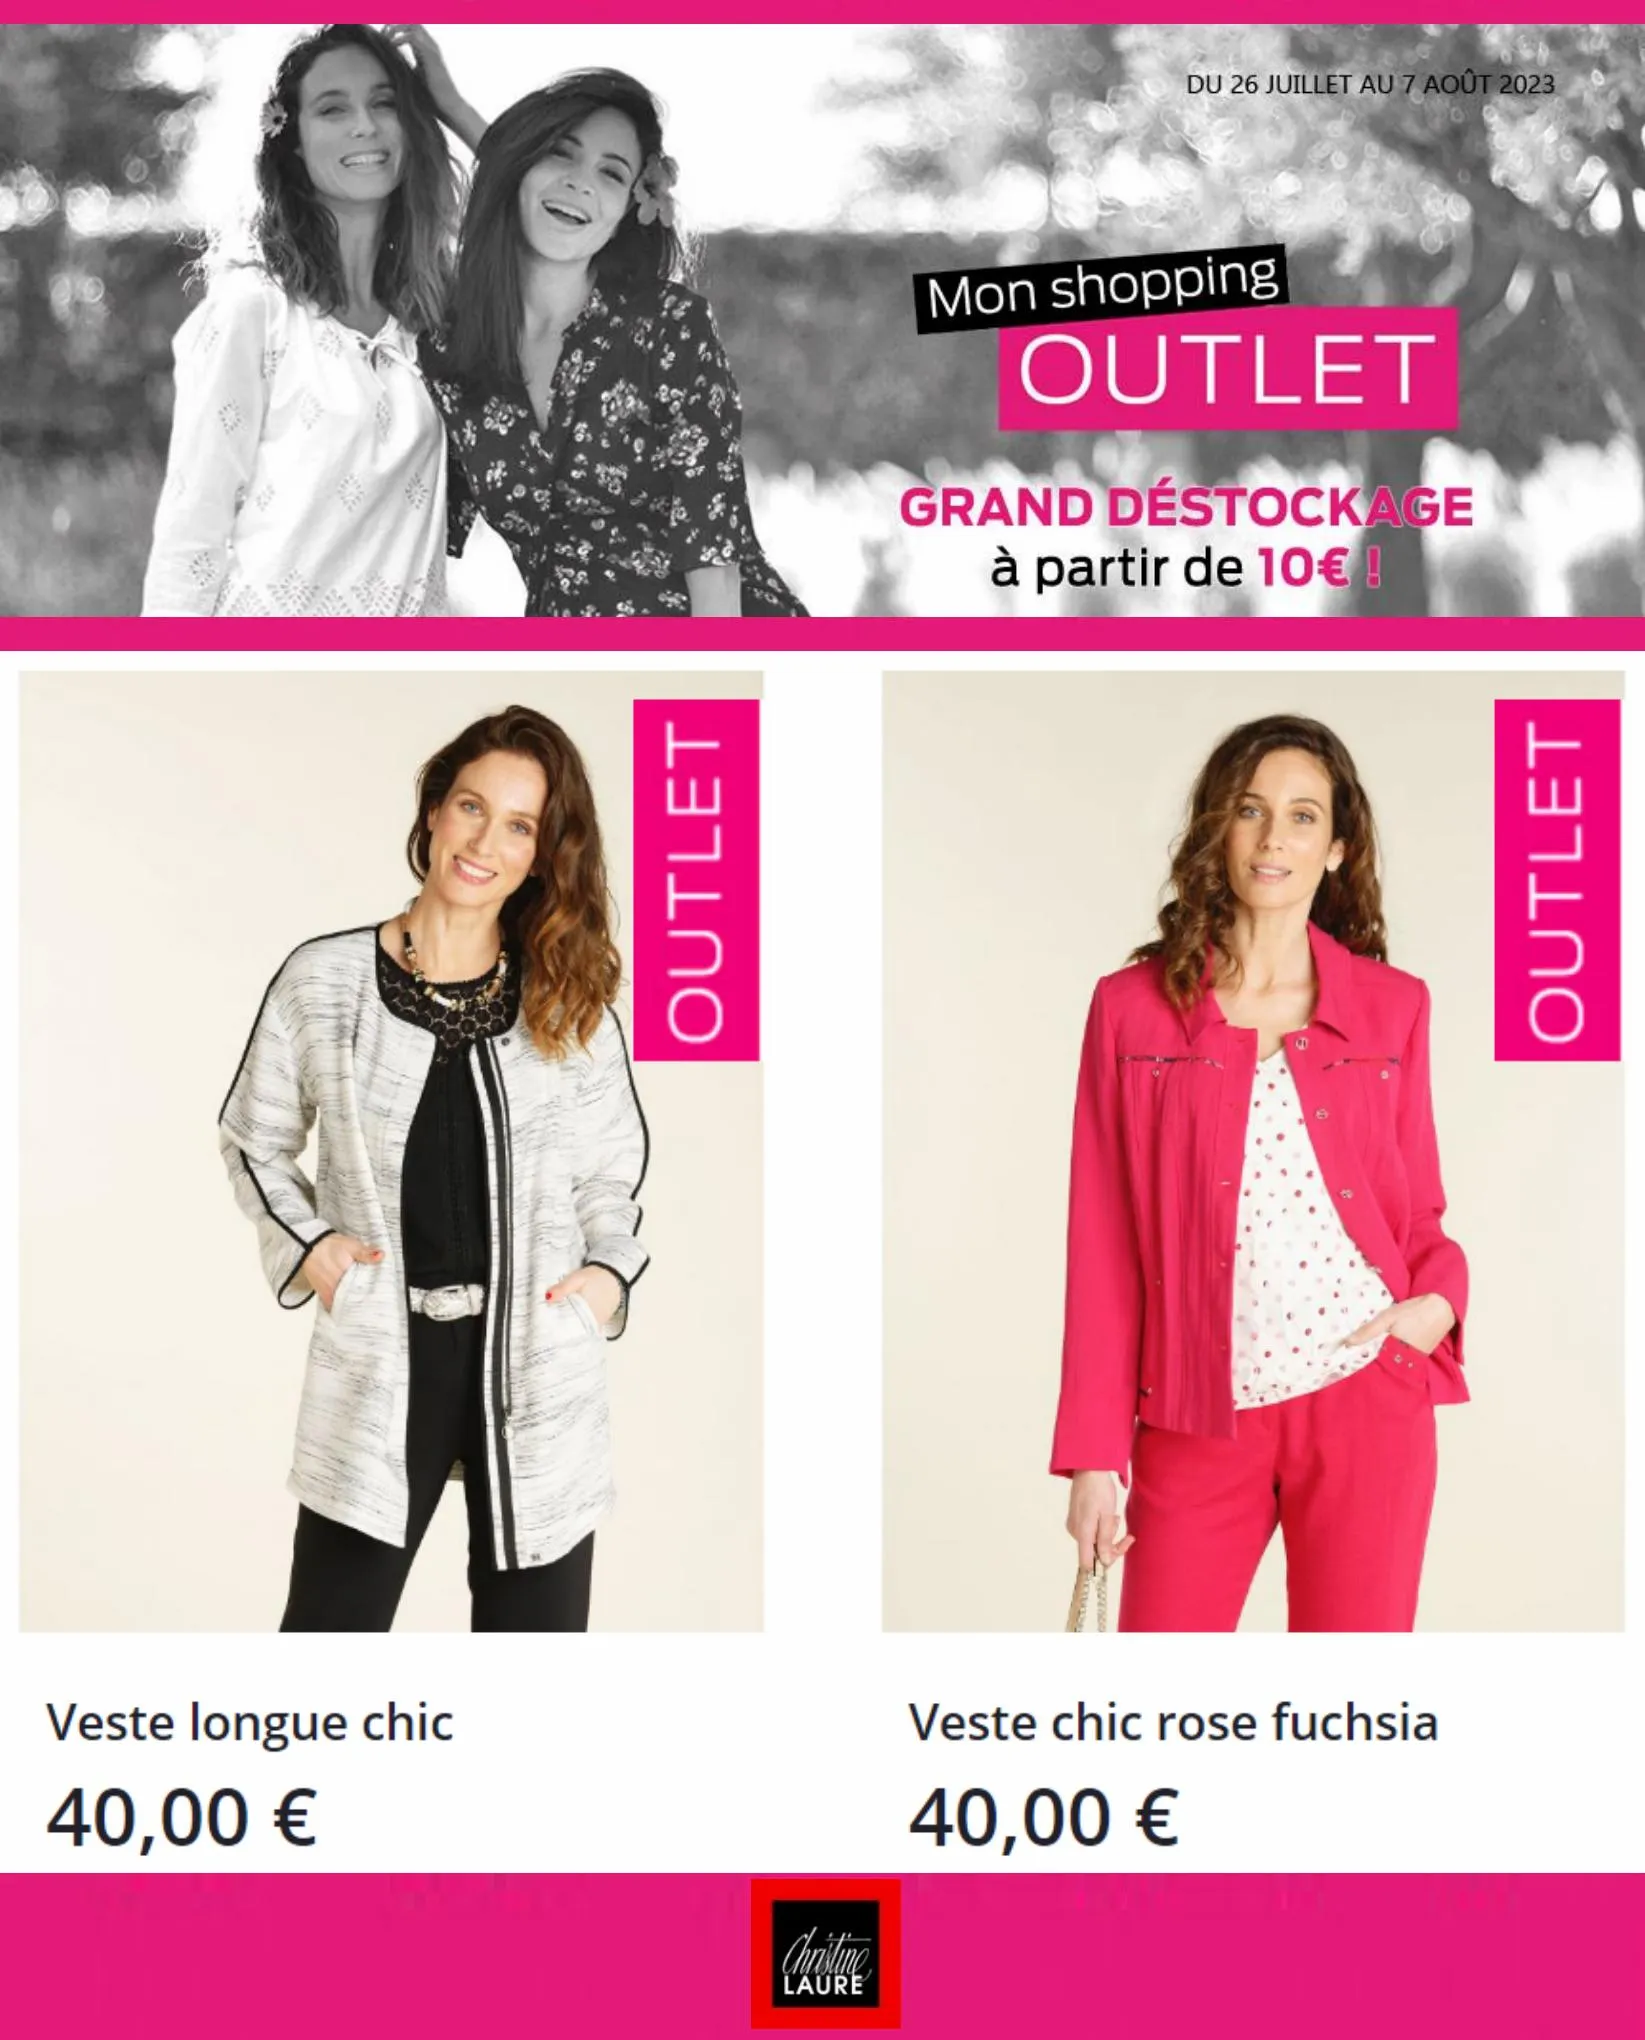 Catalogue Mon Shopping Outlet, page 00002